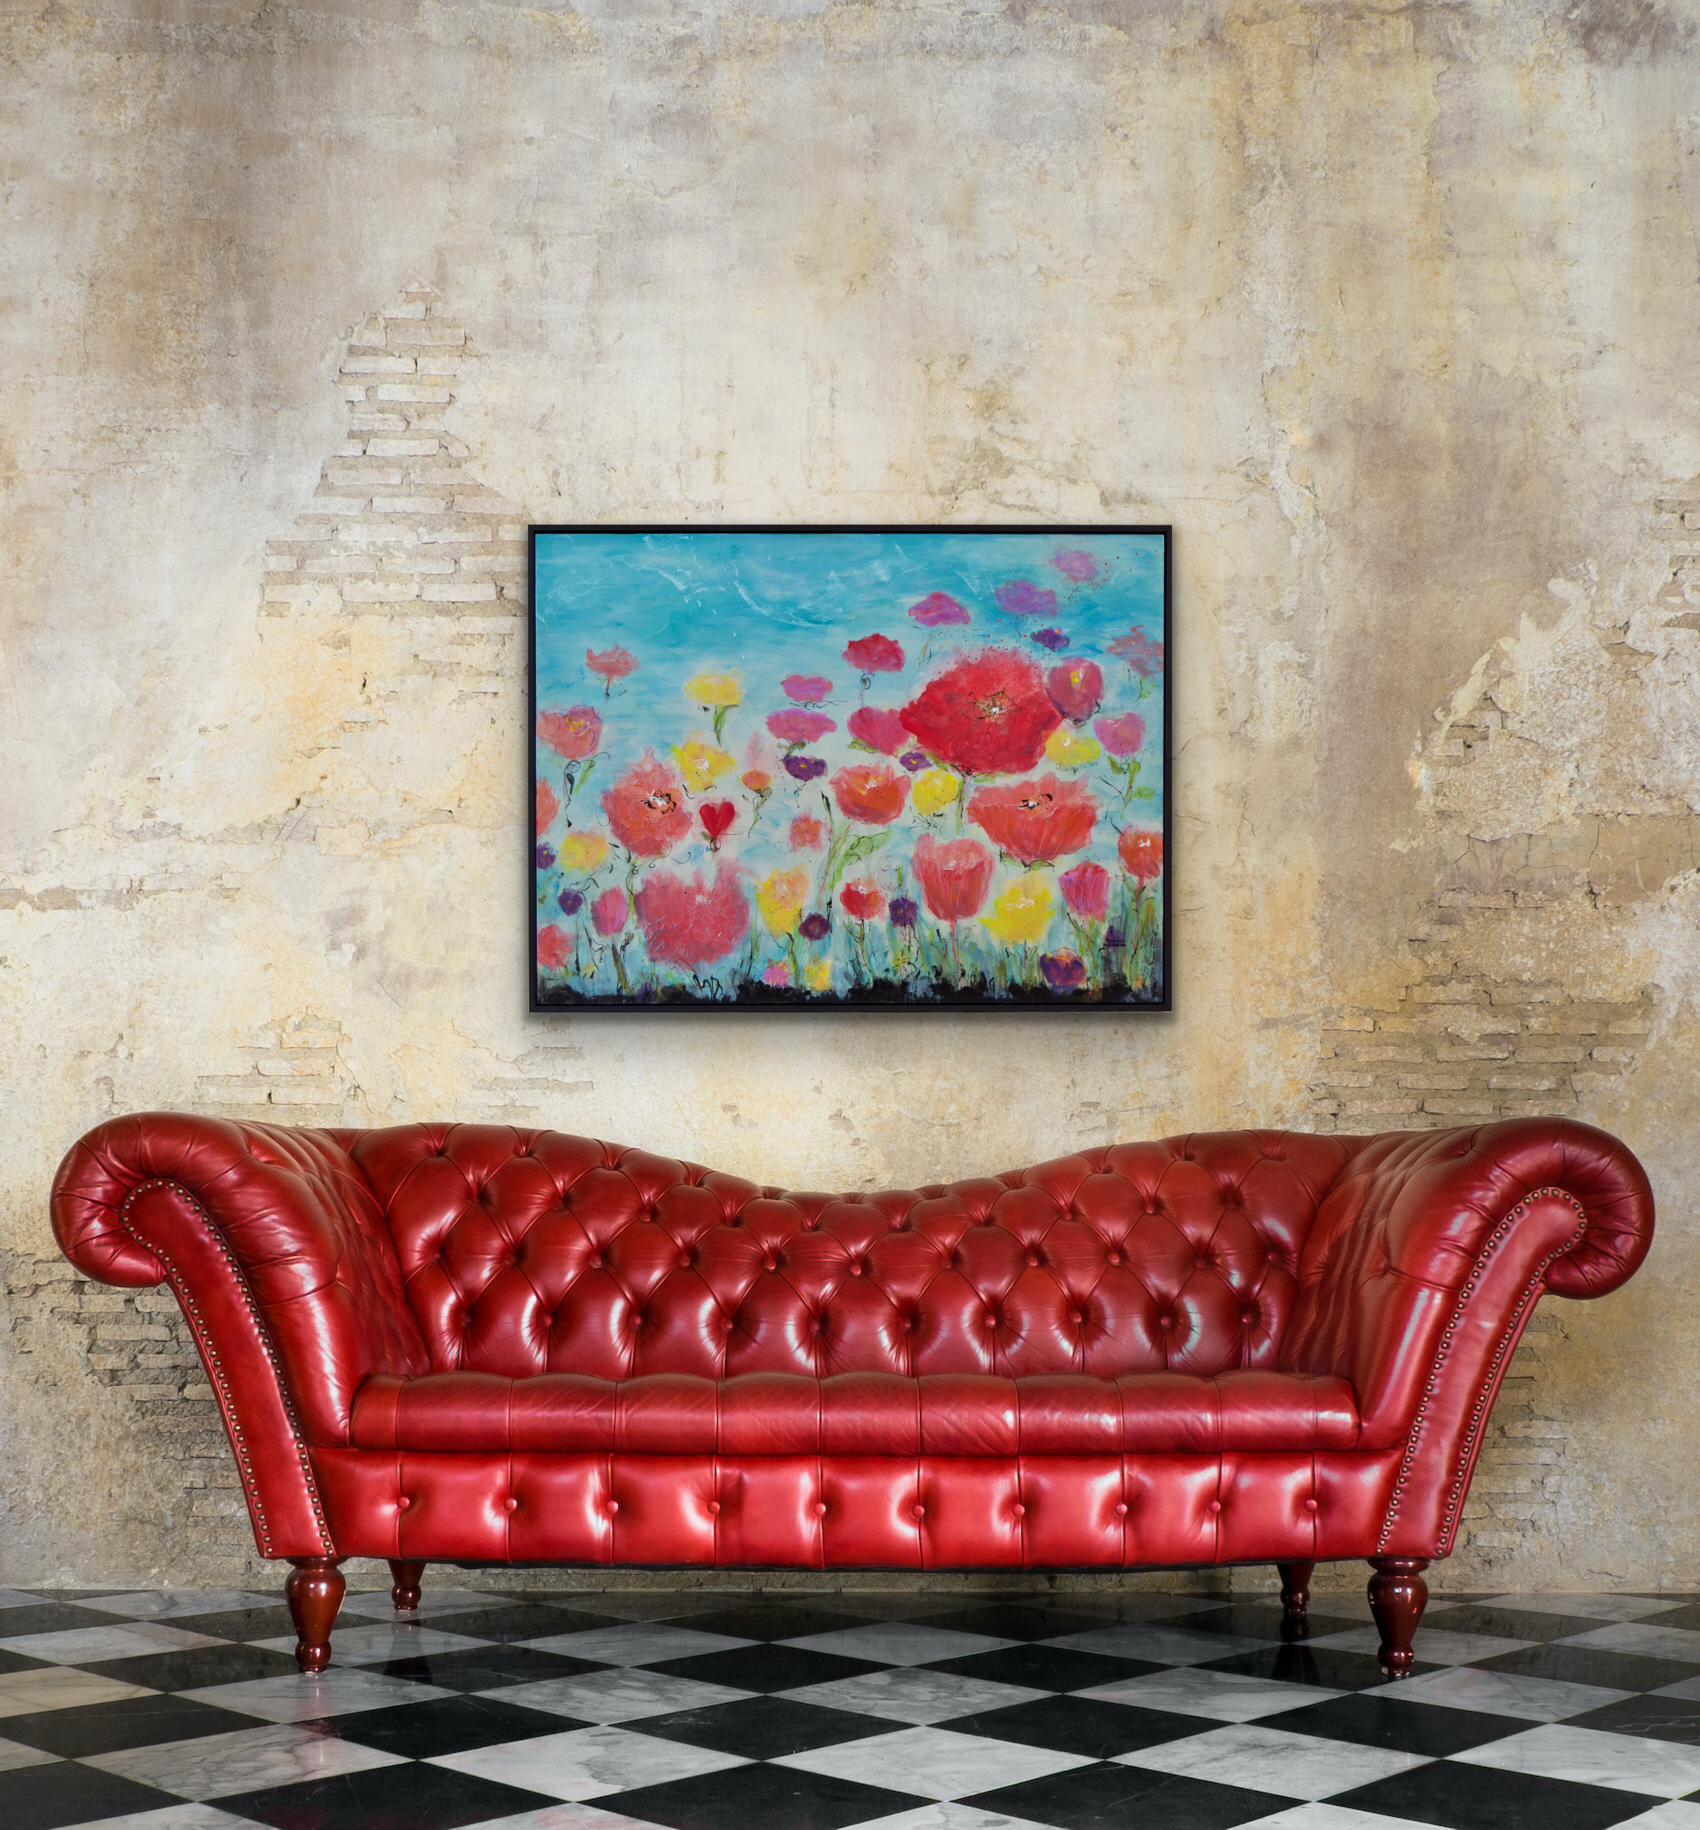 Vibrant art shown above a red leather sofa against a natural brick wall